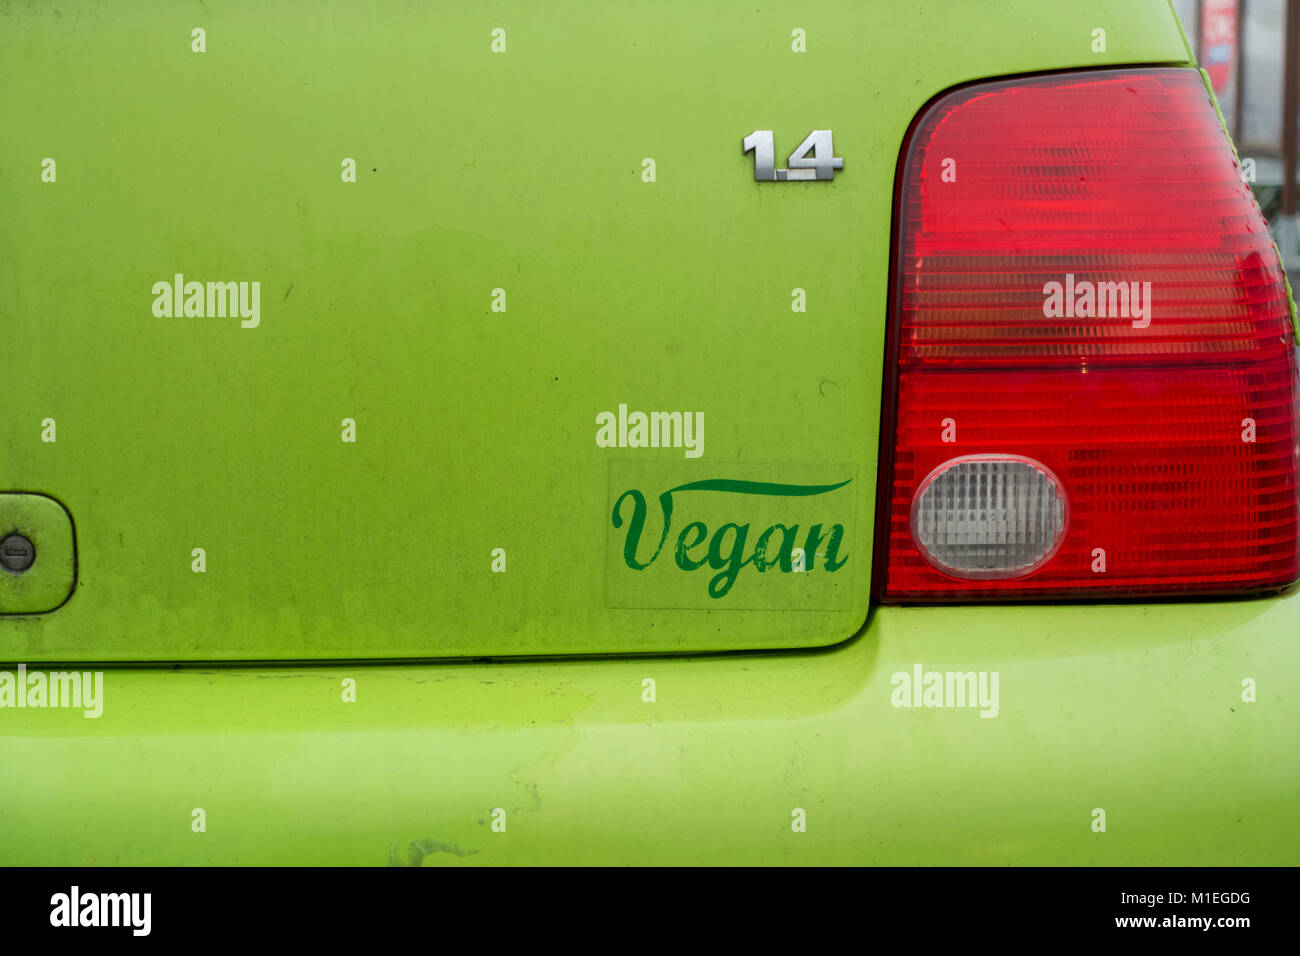 Small green Volkswagen Lupo car with Vegan sticker on the back Stock Photo